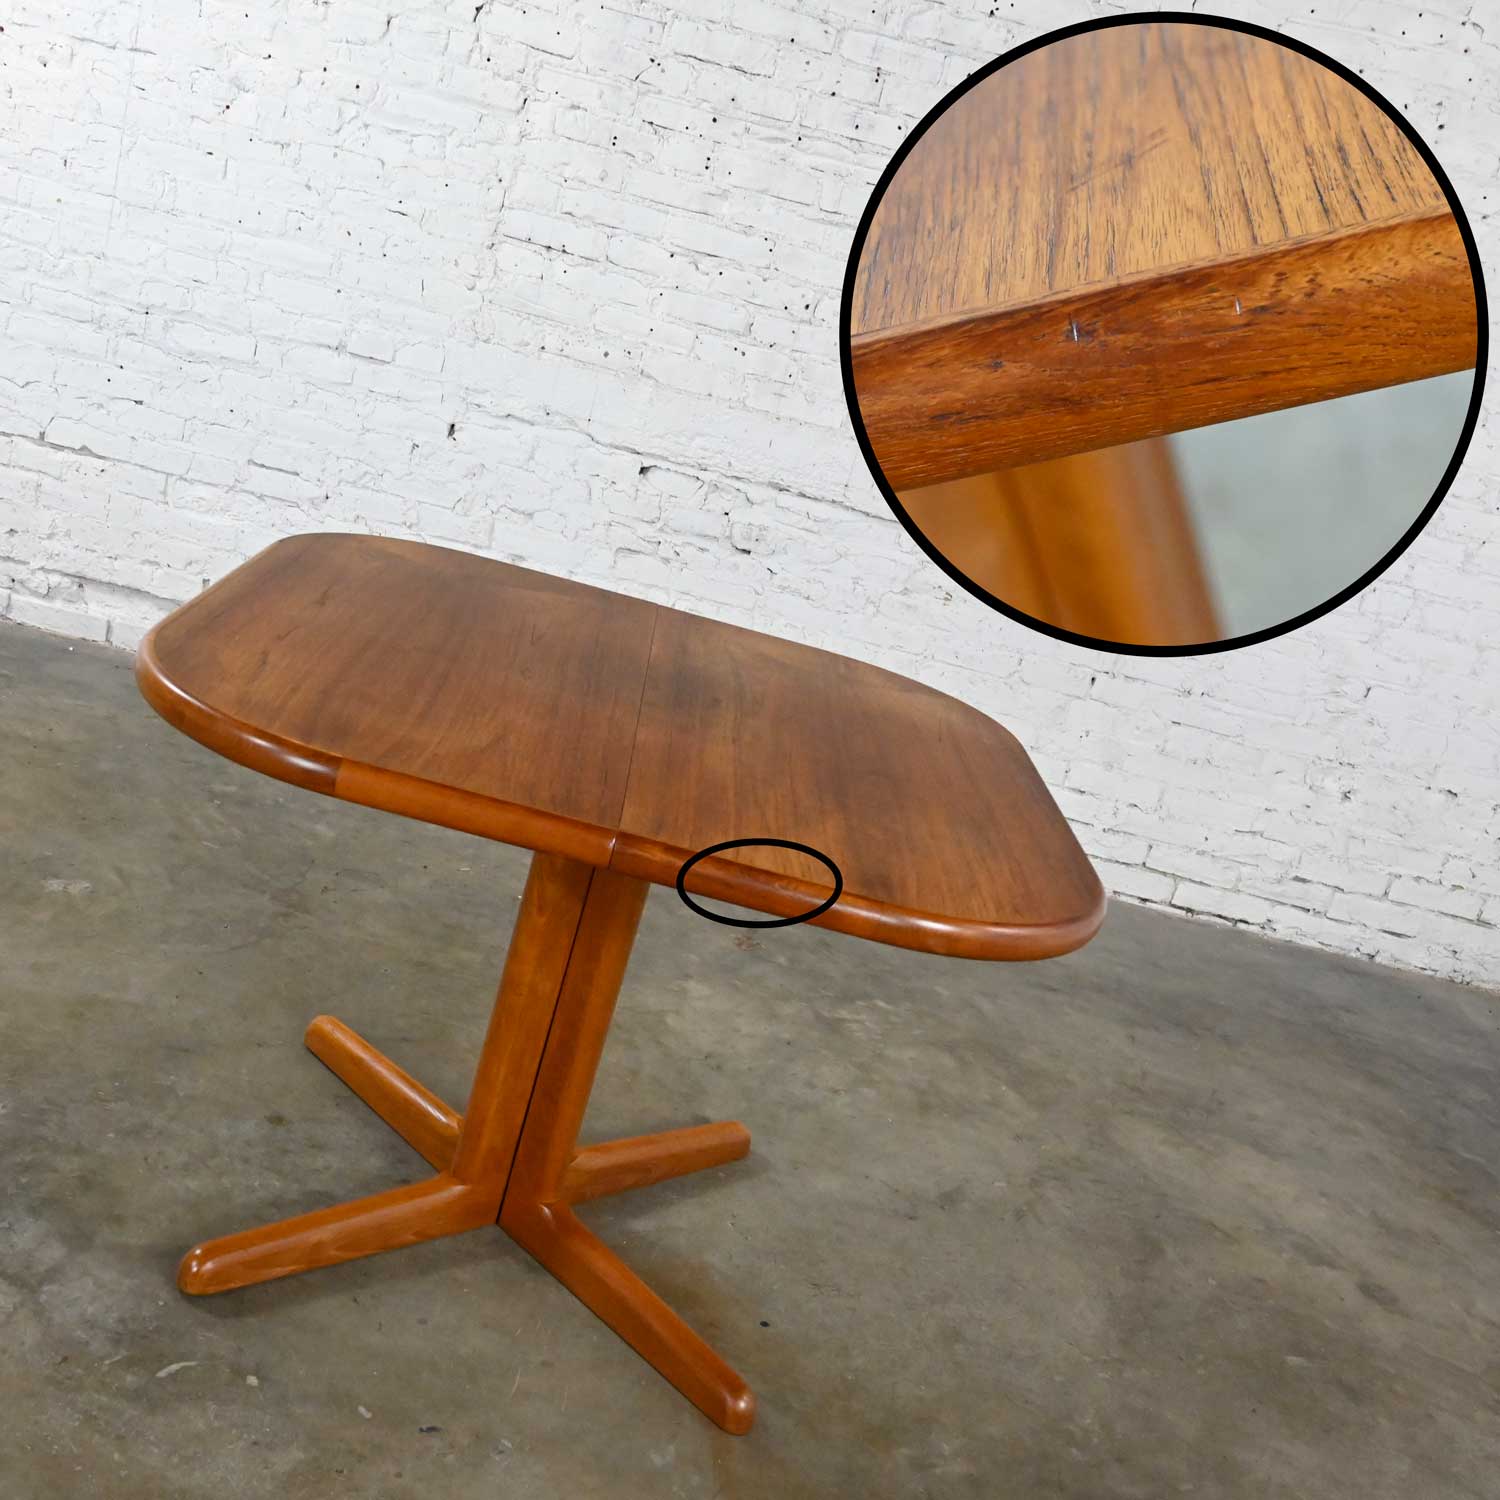 Vintage Teak Scandinavian Modern Expanding Dining Table with 2 Leaves Style Neils Moller